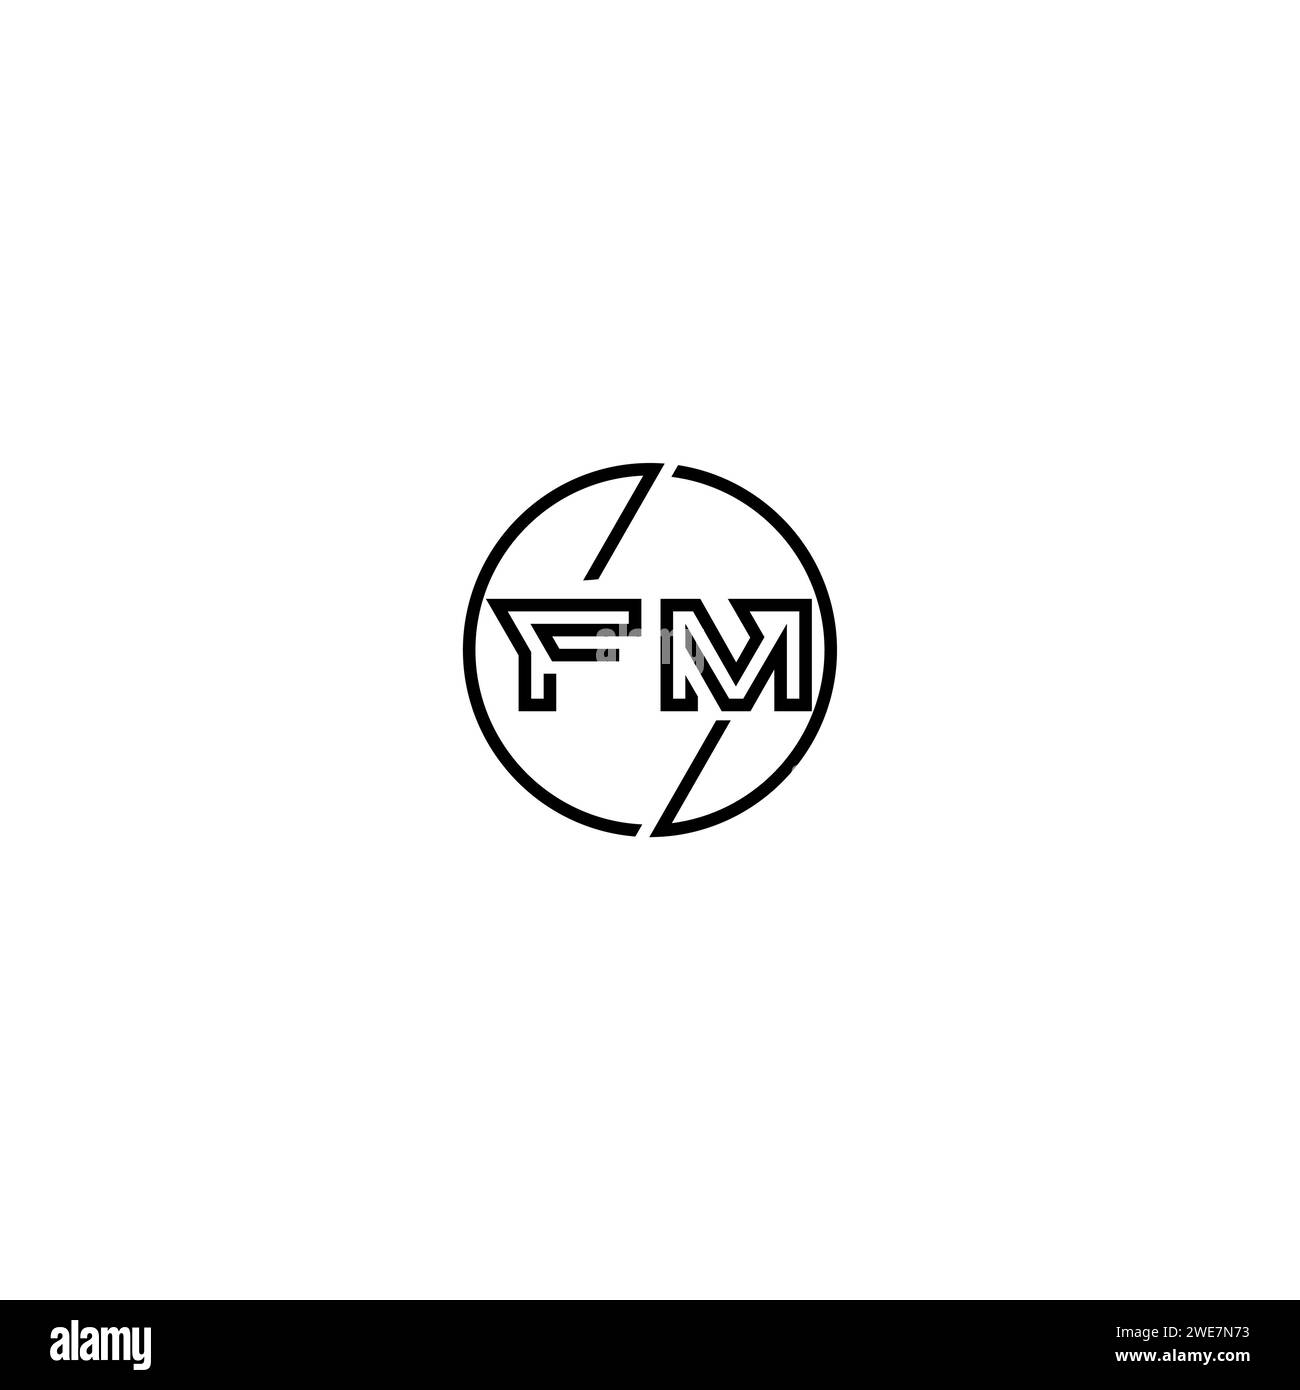 FM simple outline concept logo and circle of initial design black and white background Stock Vector